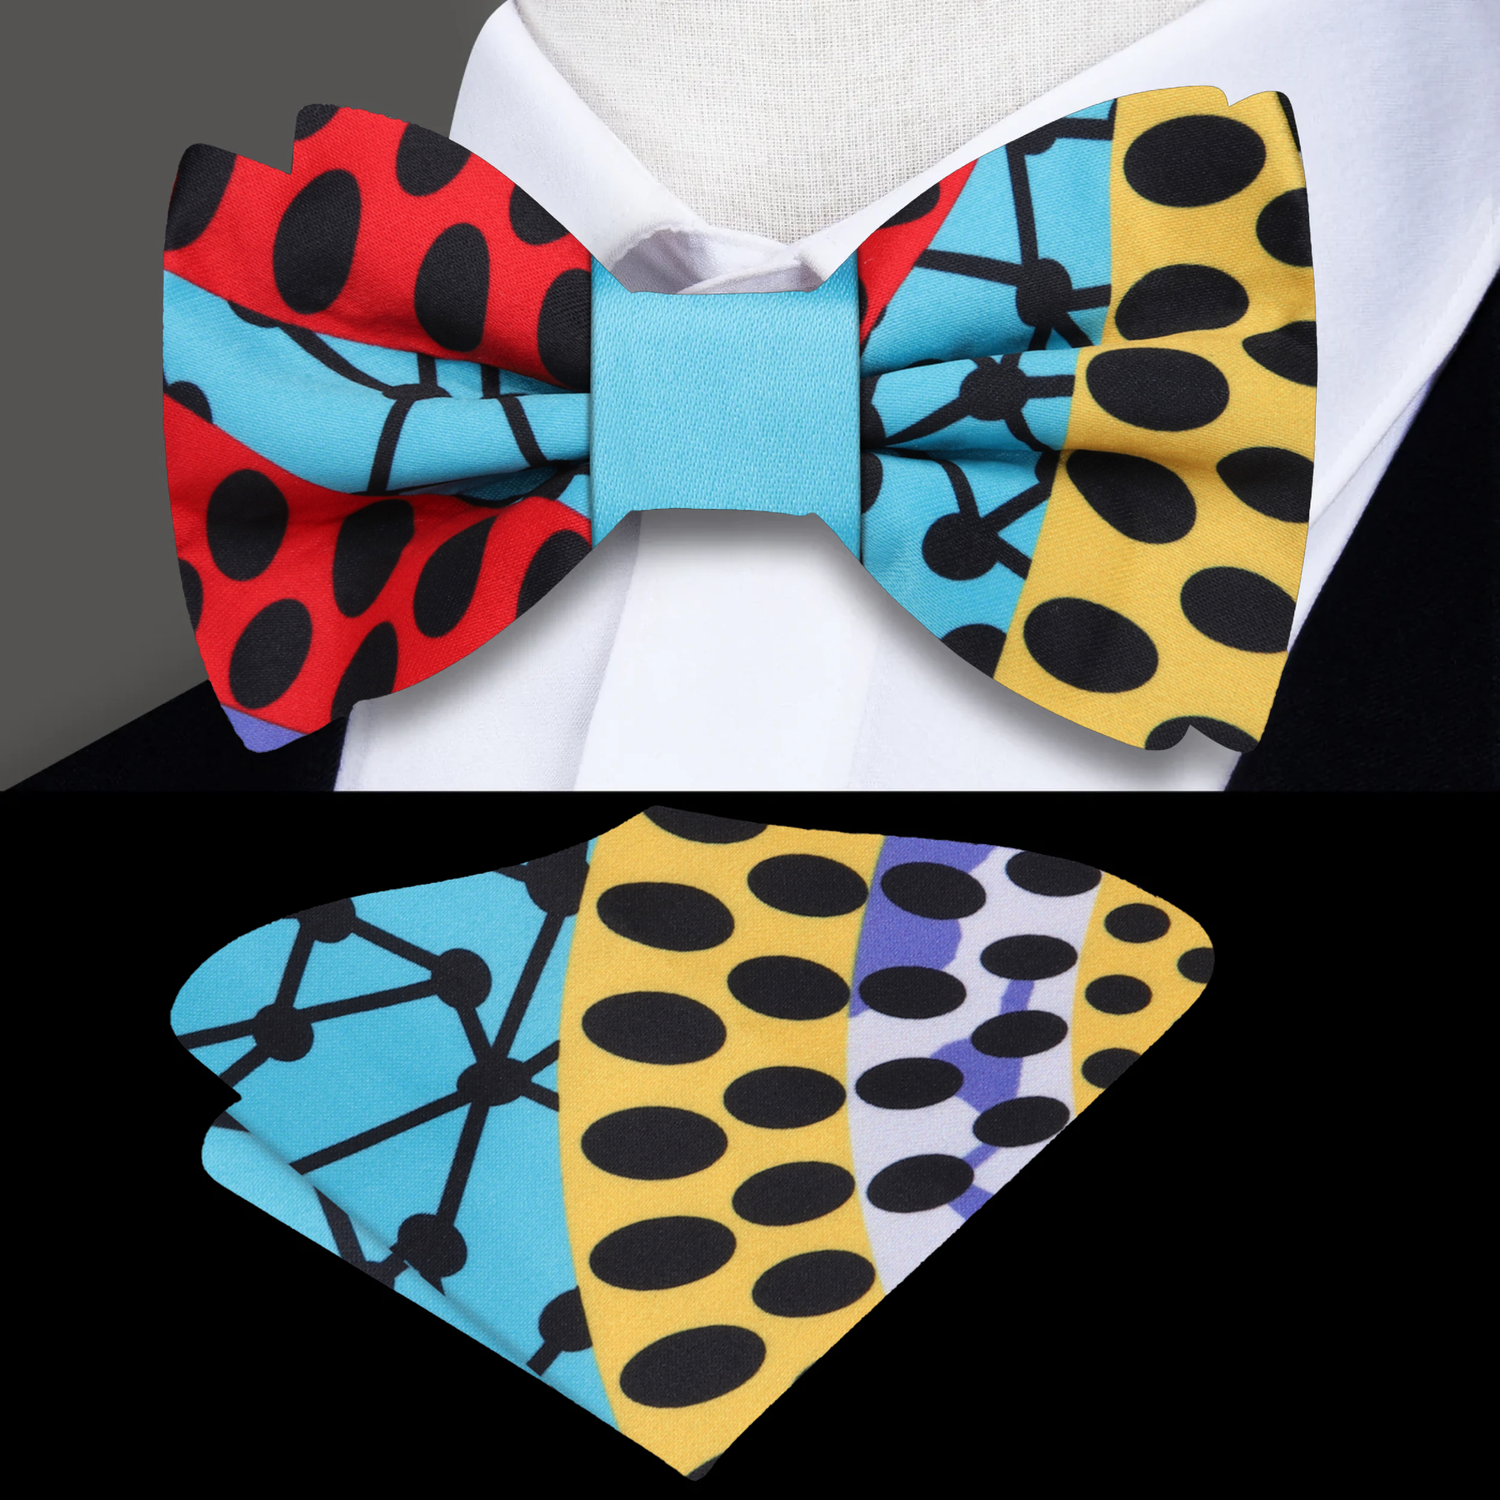 Red, Light Blue, Yellow, Black Abstract Bow Tie and Pocket Square||Red, Yellow, Black